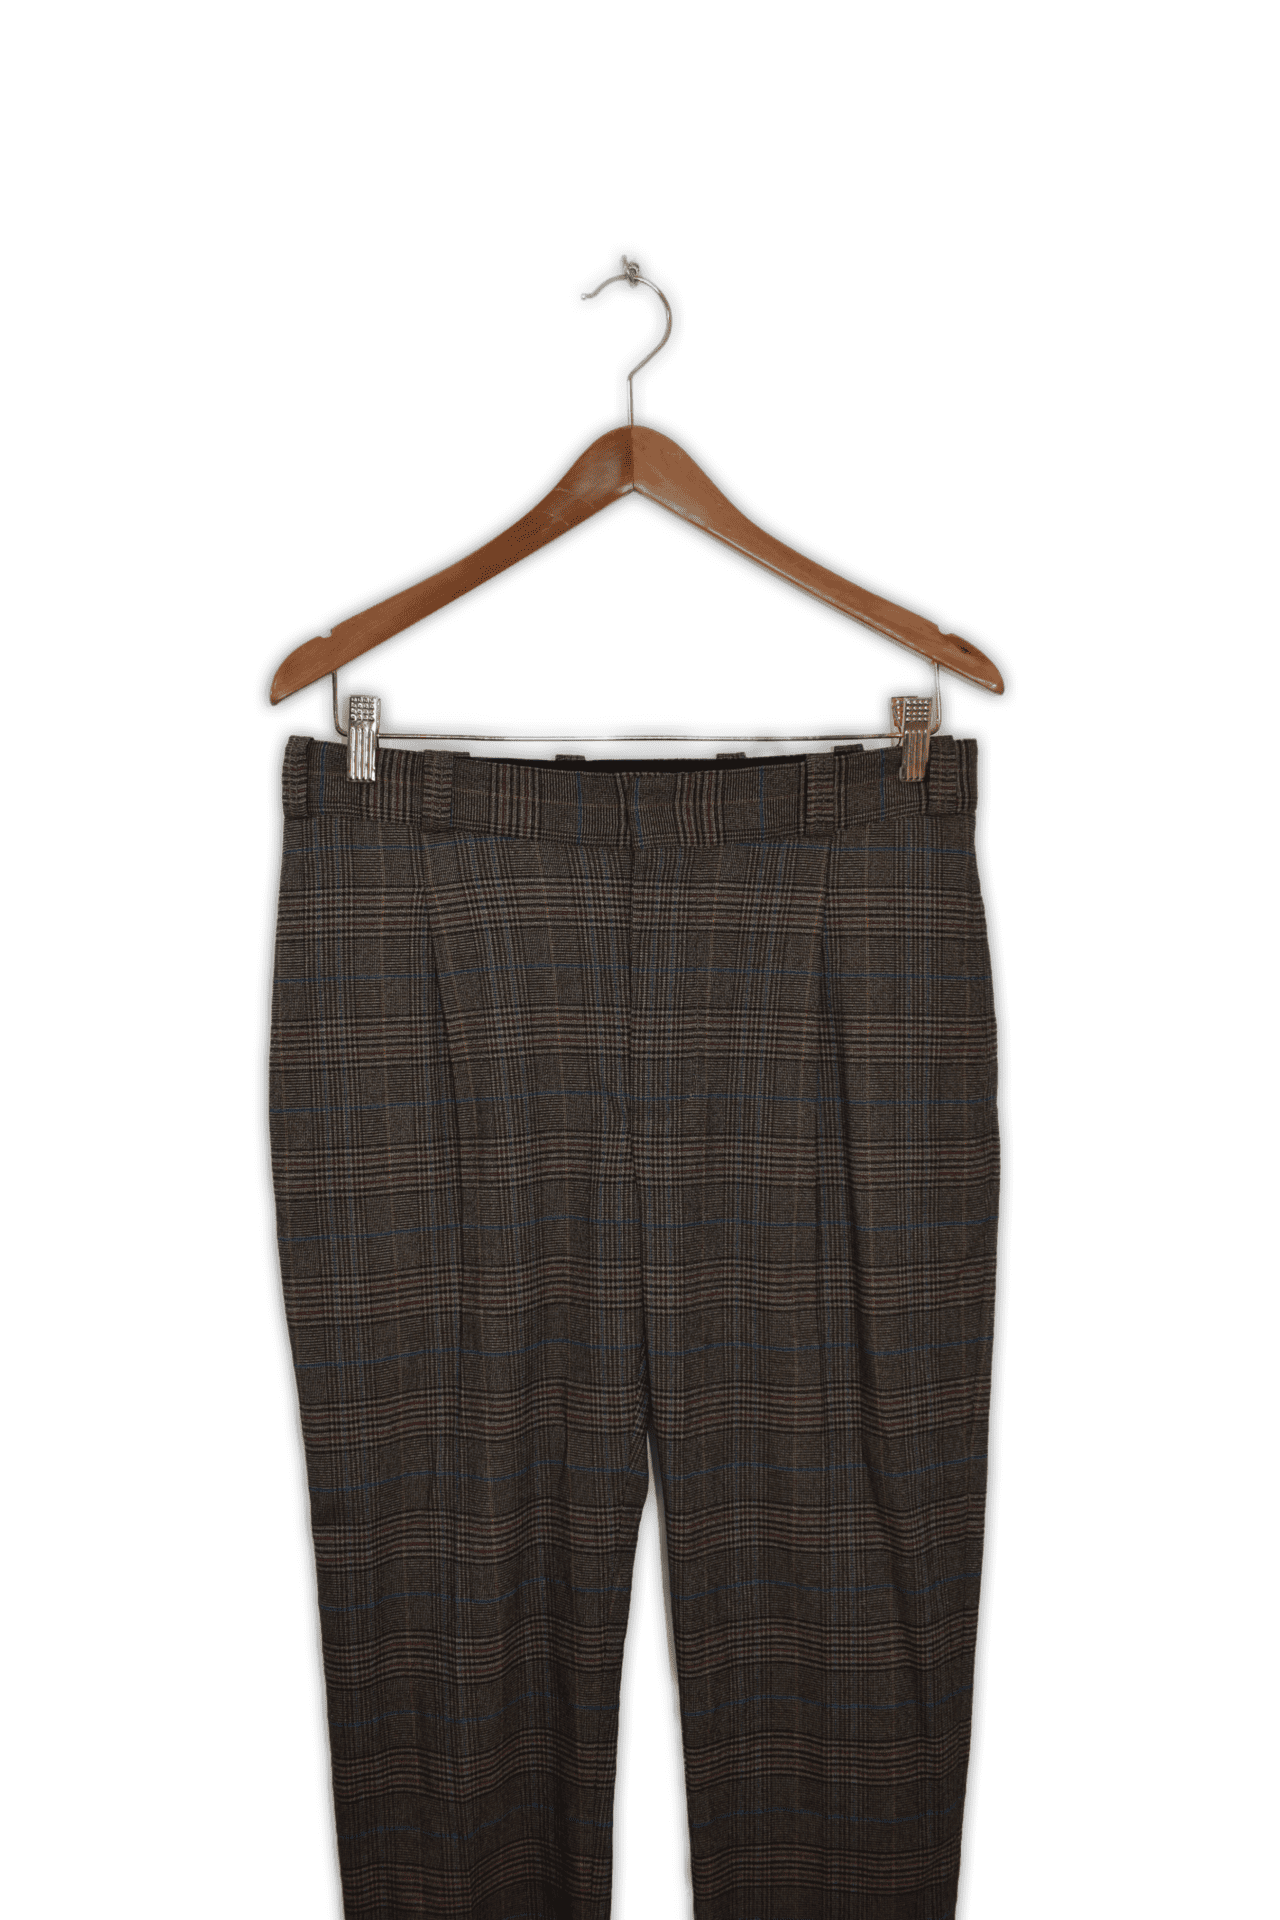 Tartan Karen Walker Pants featuring tailored fly front, belt loops, two front inseam and two back double jetted pockets.